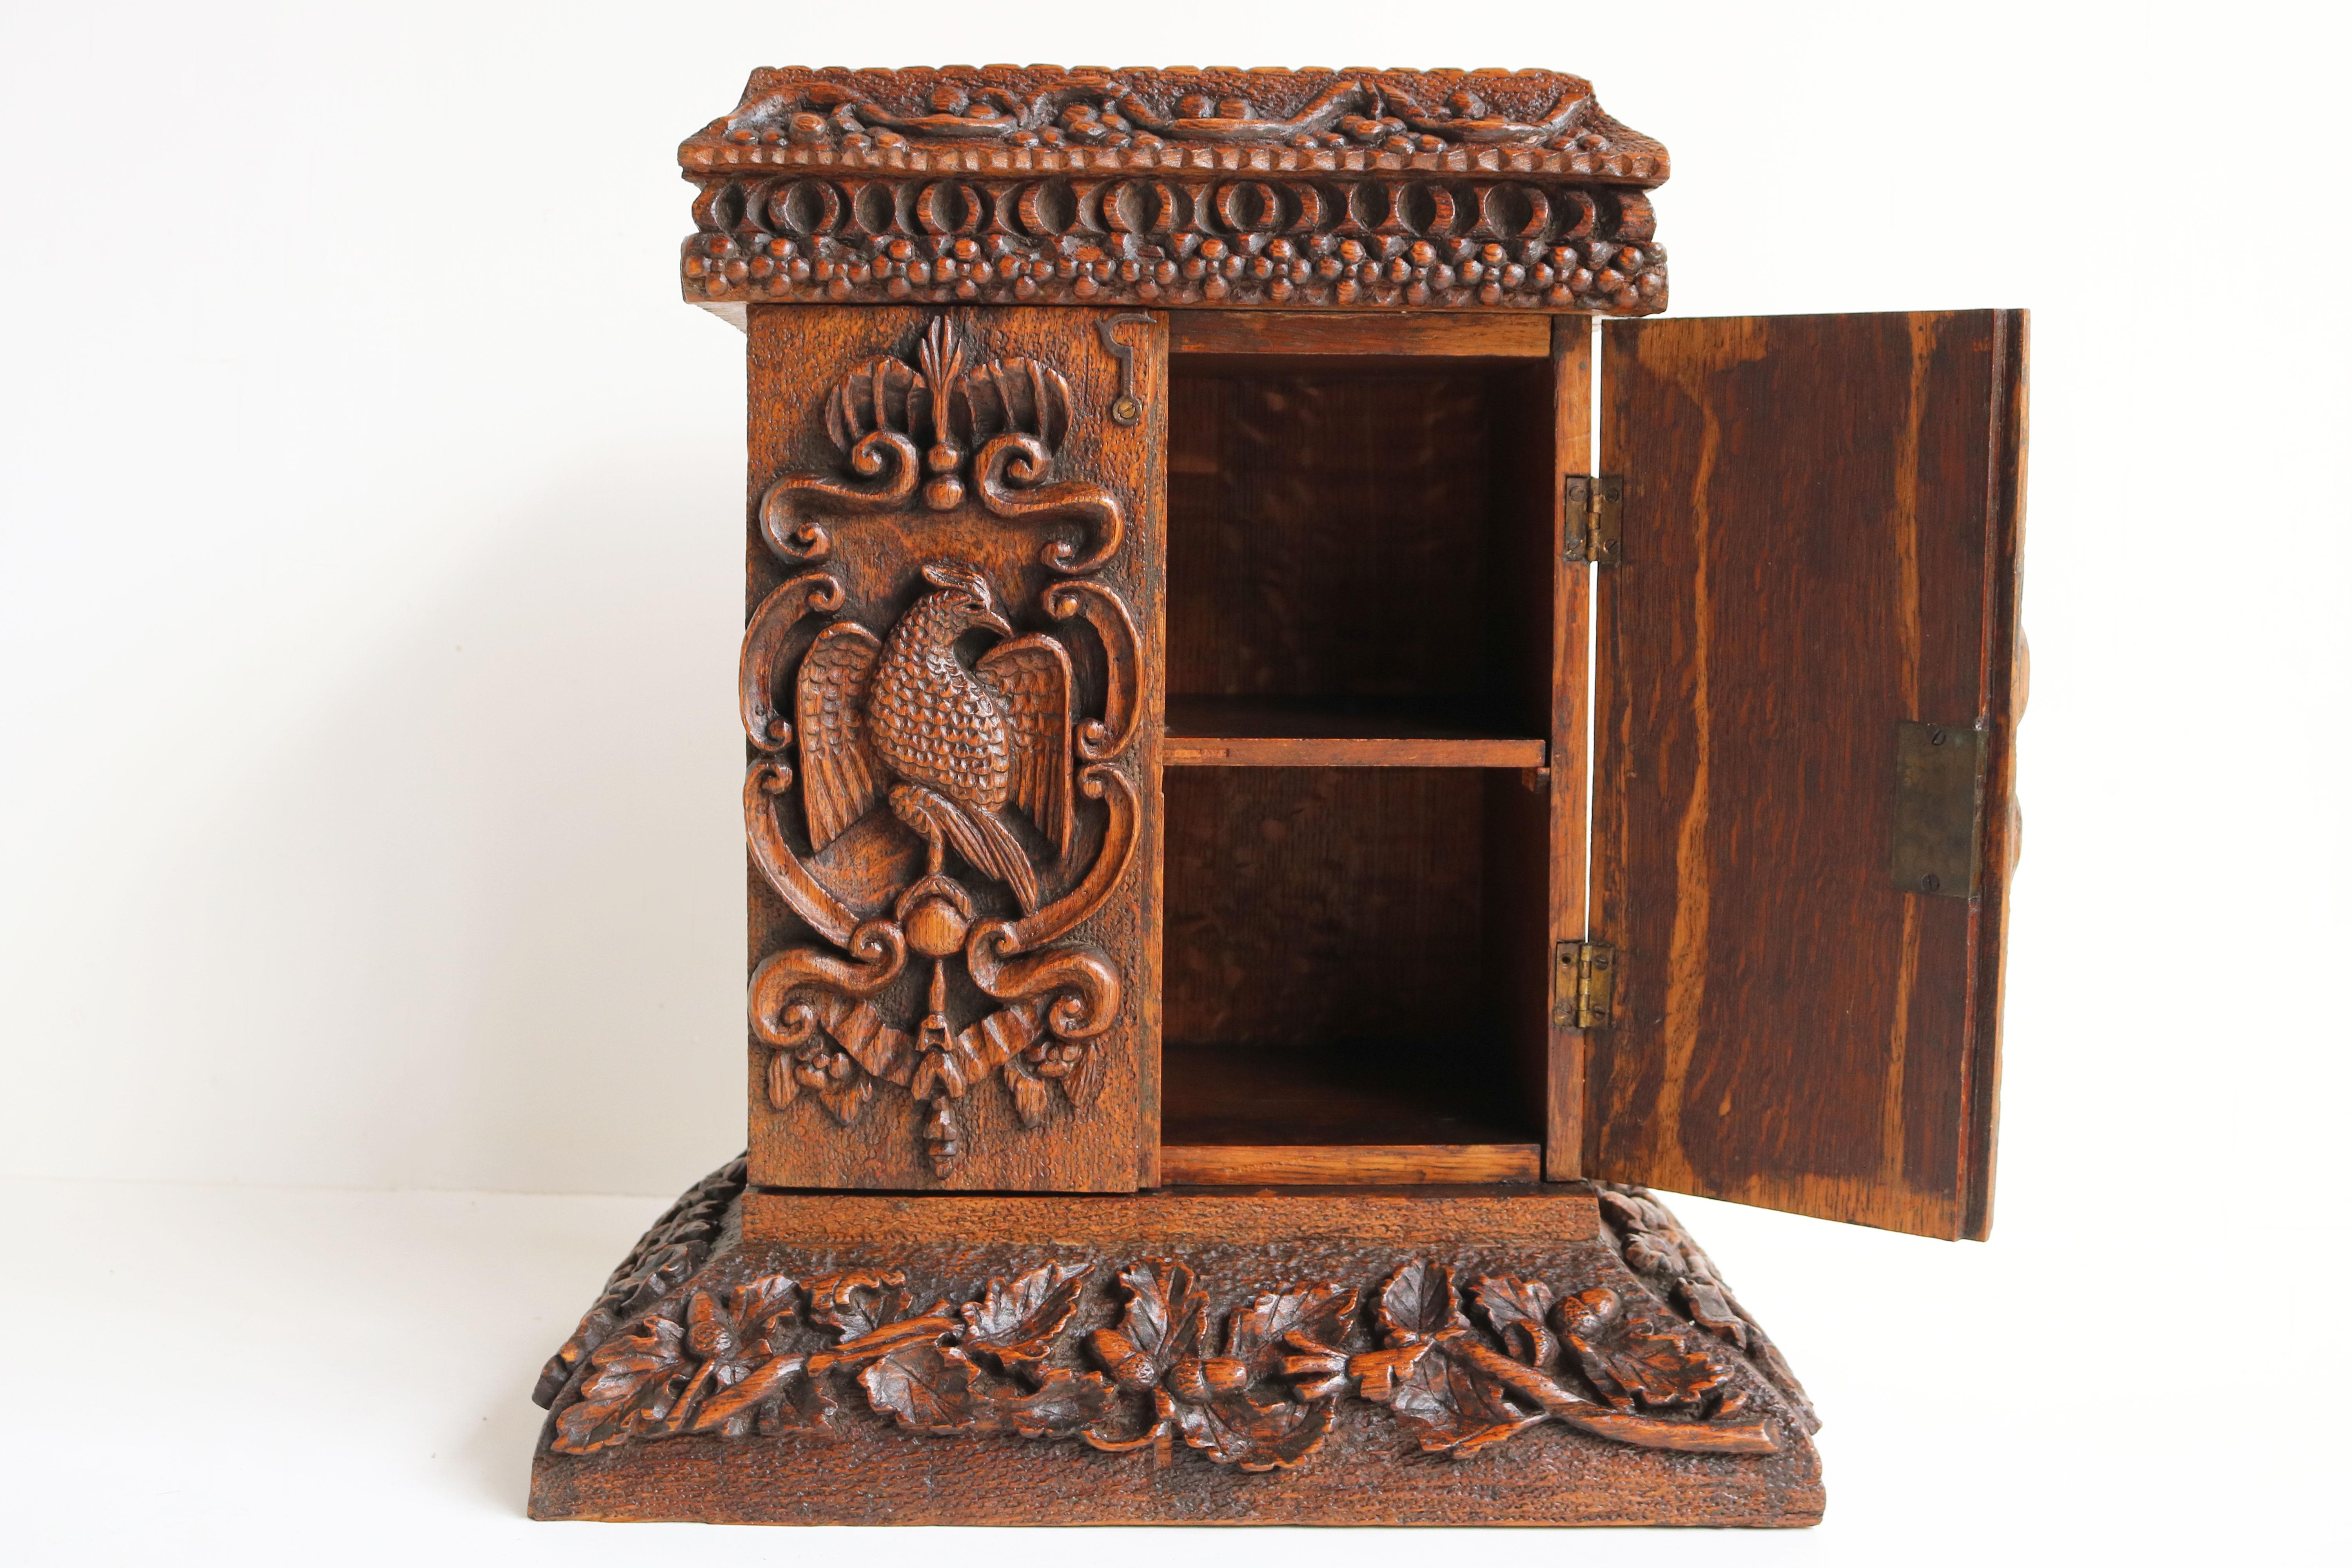 Stunning 19th century Swiss black forest hanging cabinet / small cabinet carved from solid oak. 
Superb Black Forest cabinet with floral carvings displaying leaves & acorns. The doors are decorated with 2 impressive Birds. 
The cabinet is made